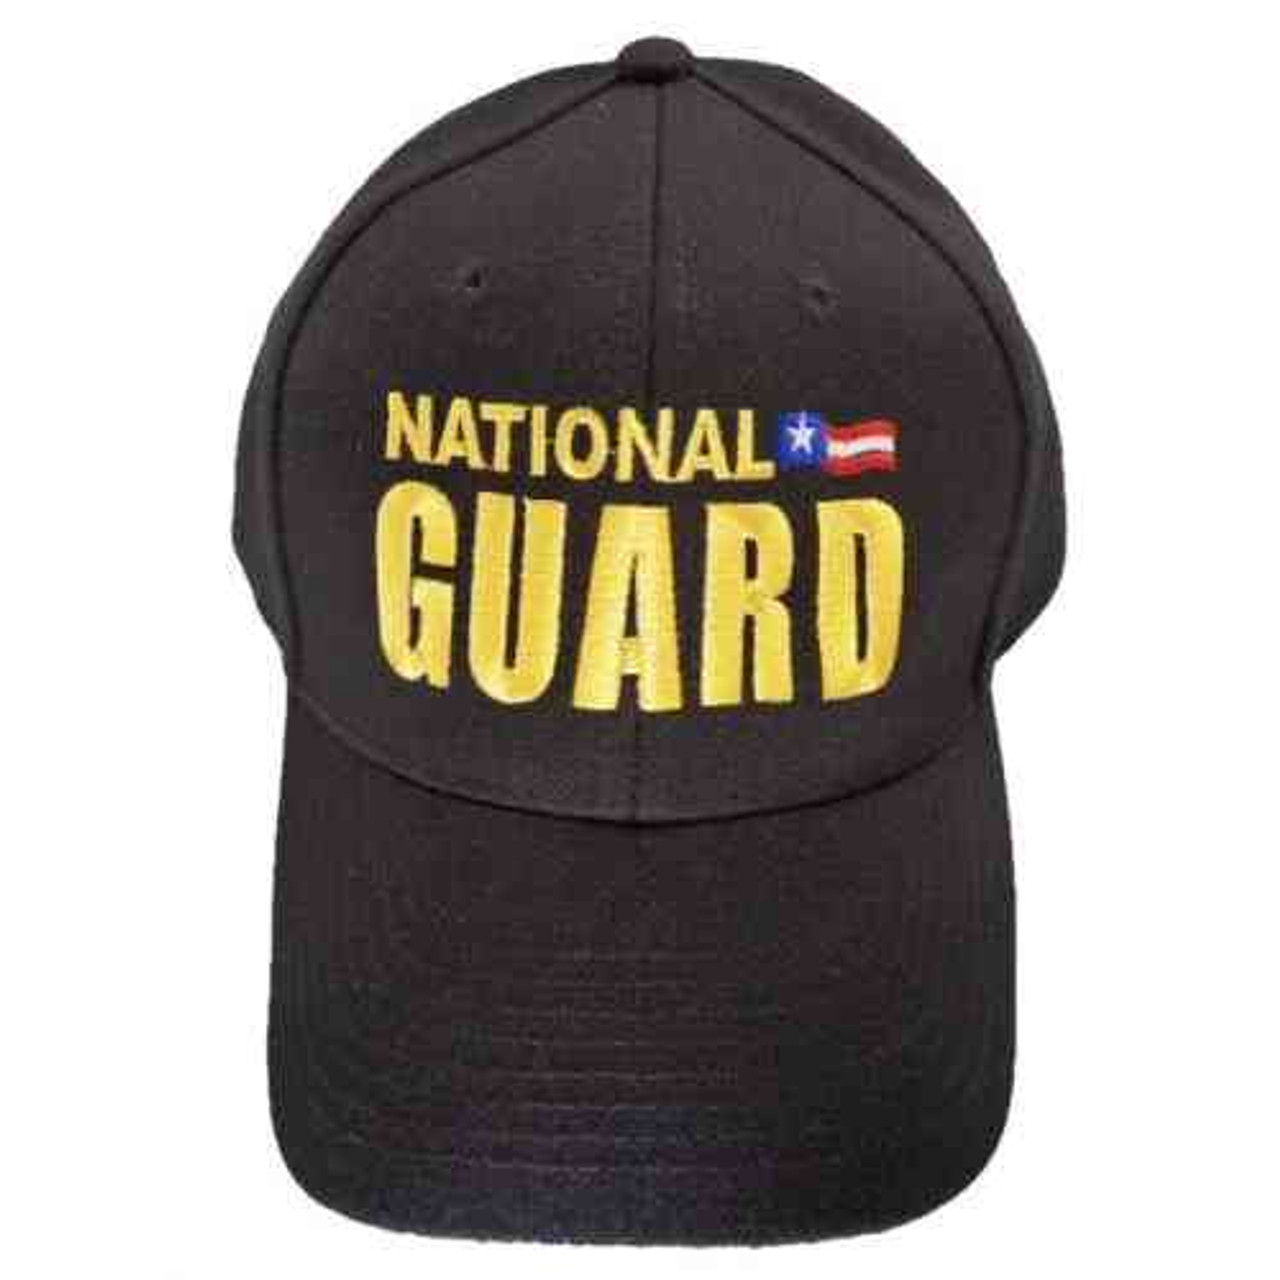 national guard hat